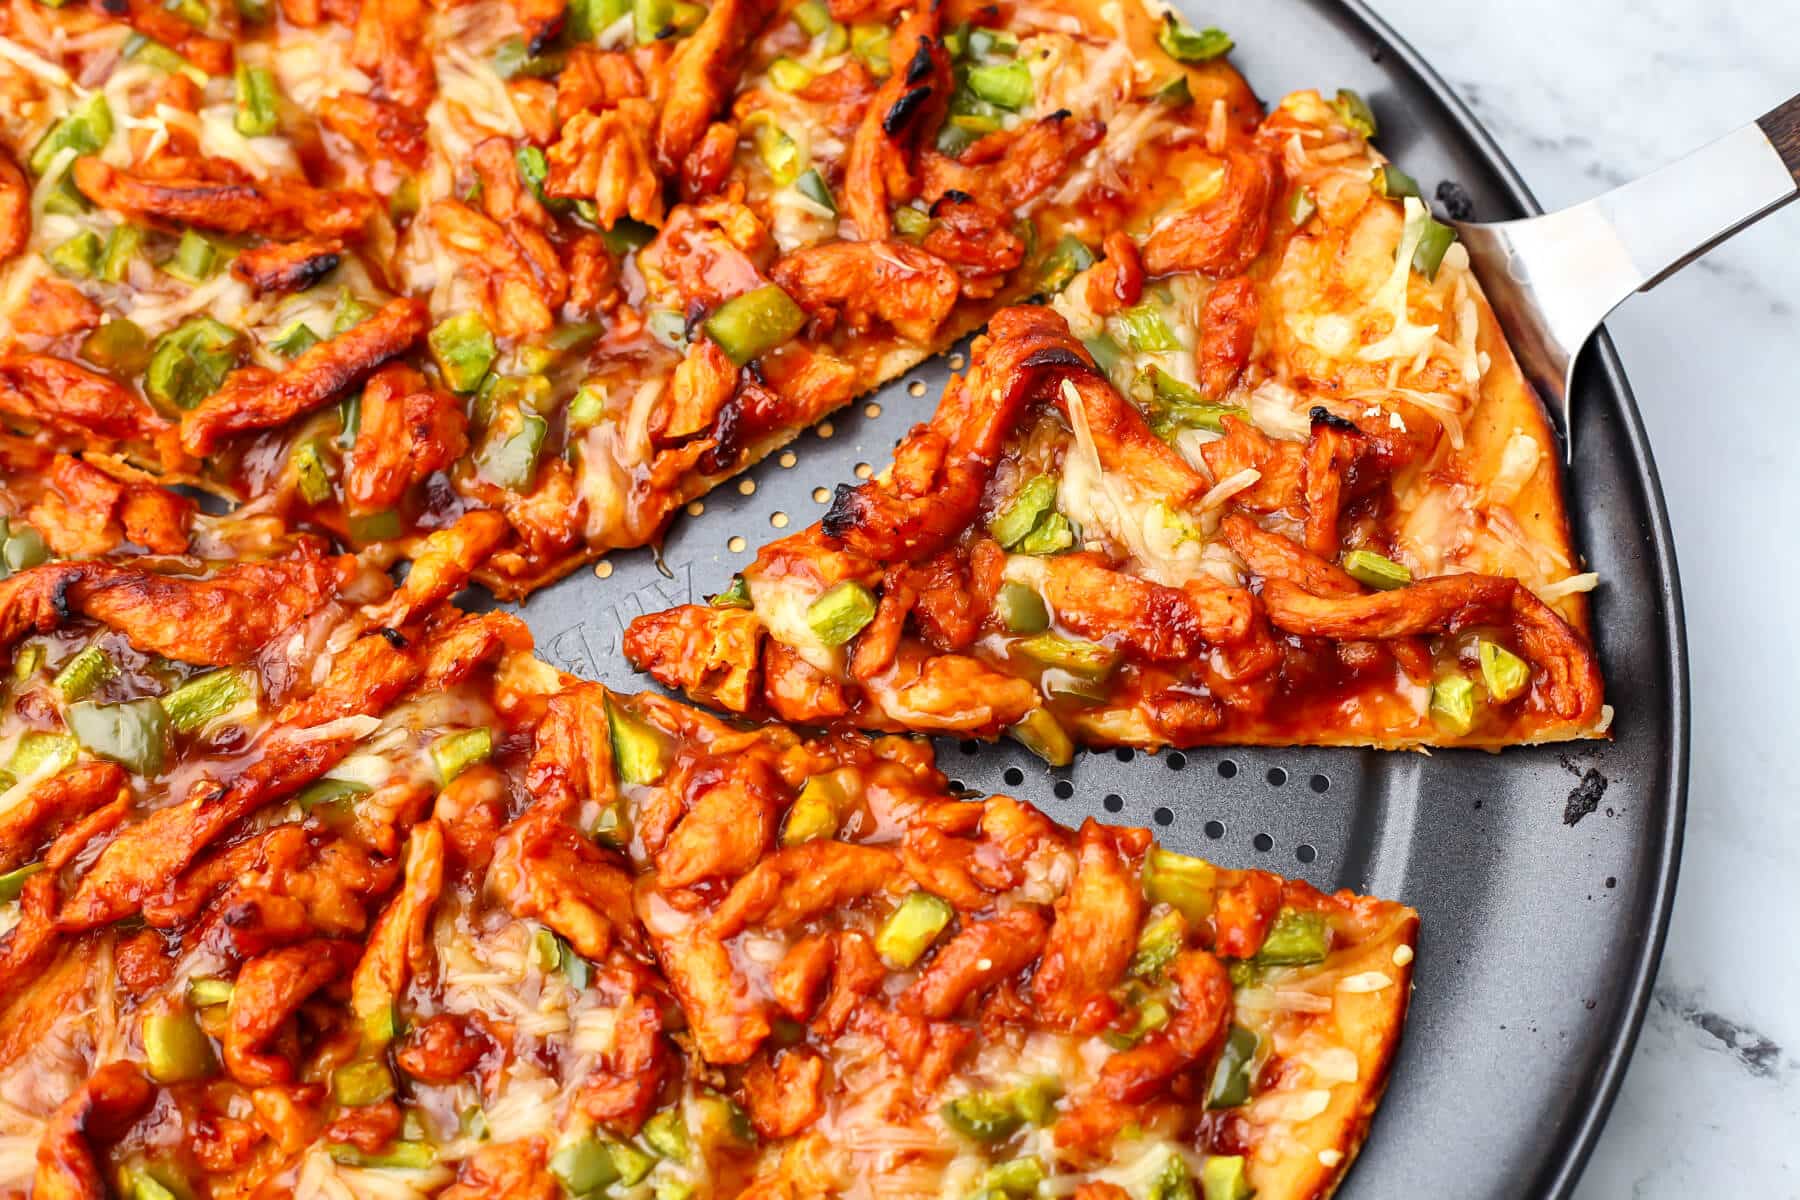 A vegan BBQ pizza with vegan chicken made from soy curls and green peppers on top.